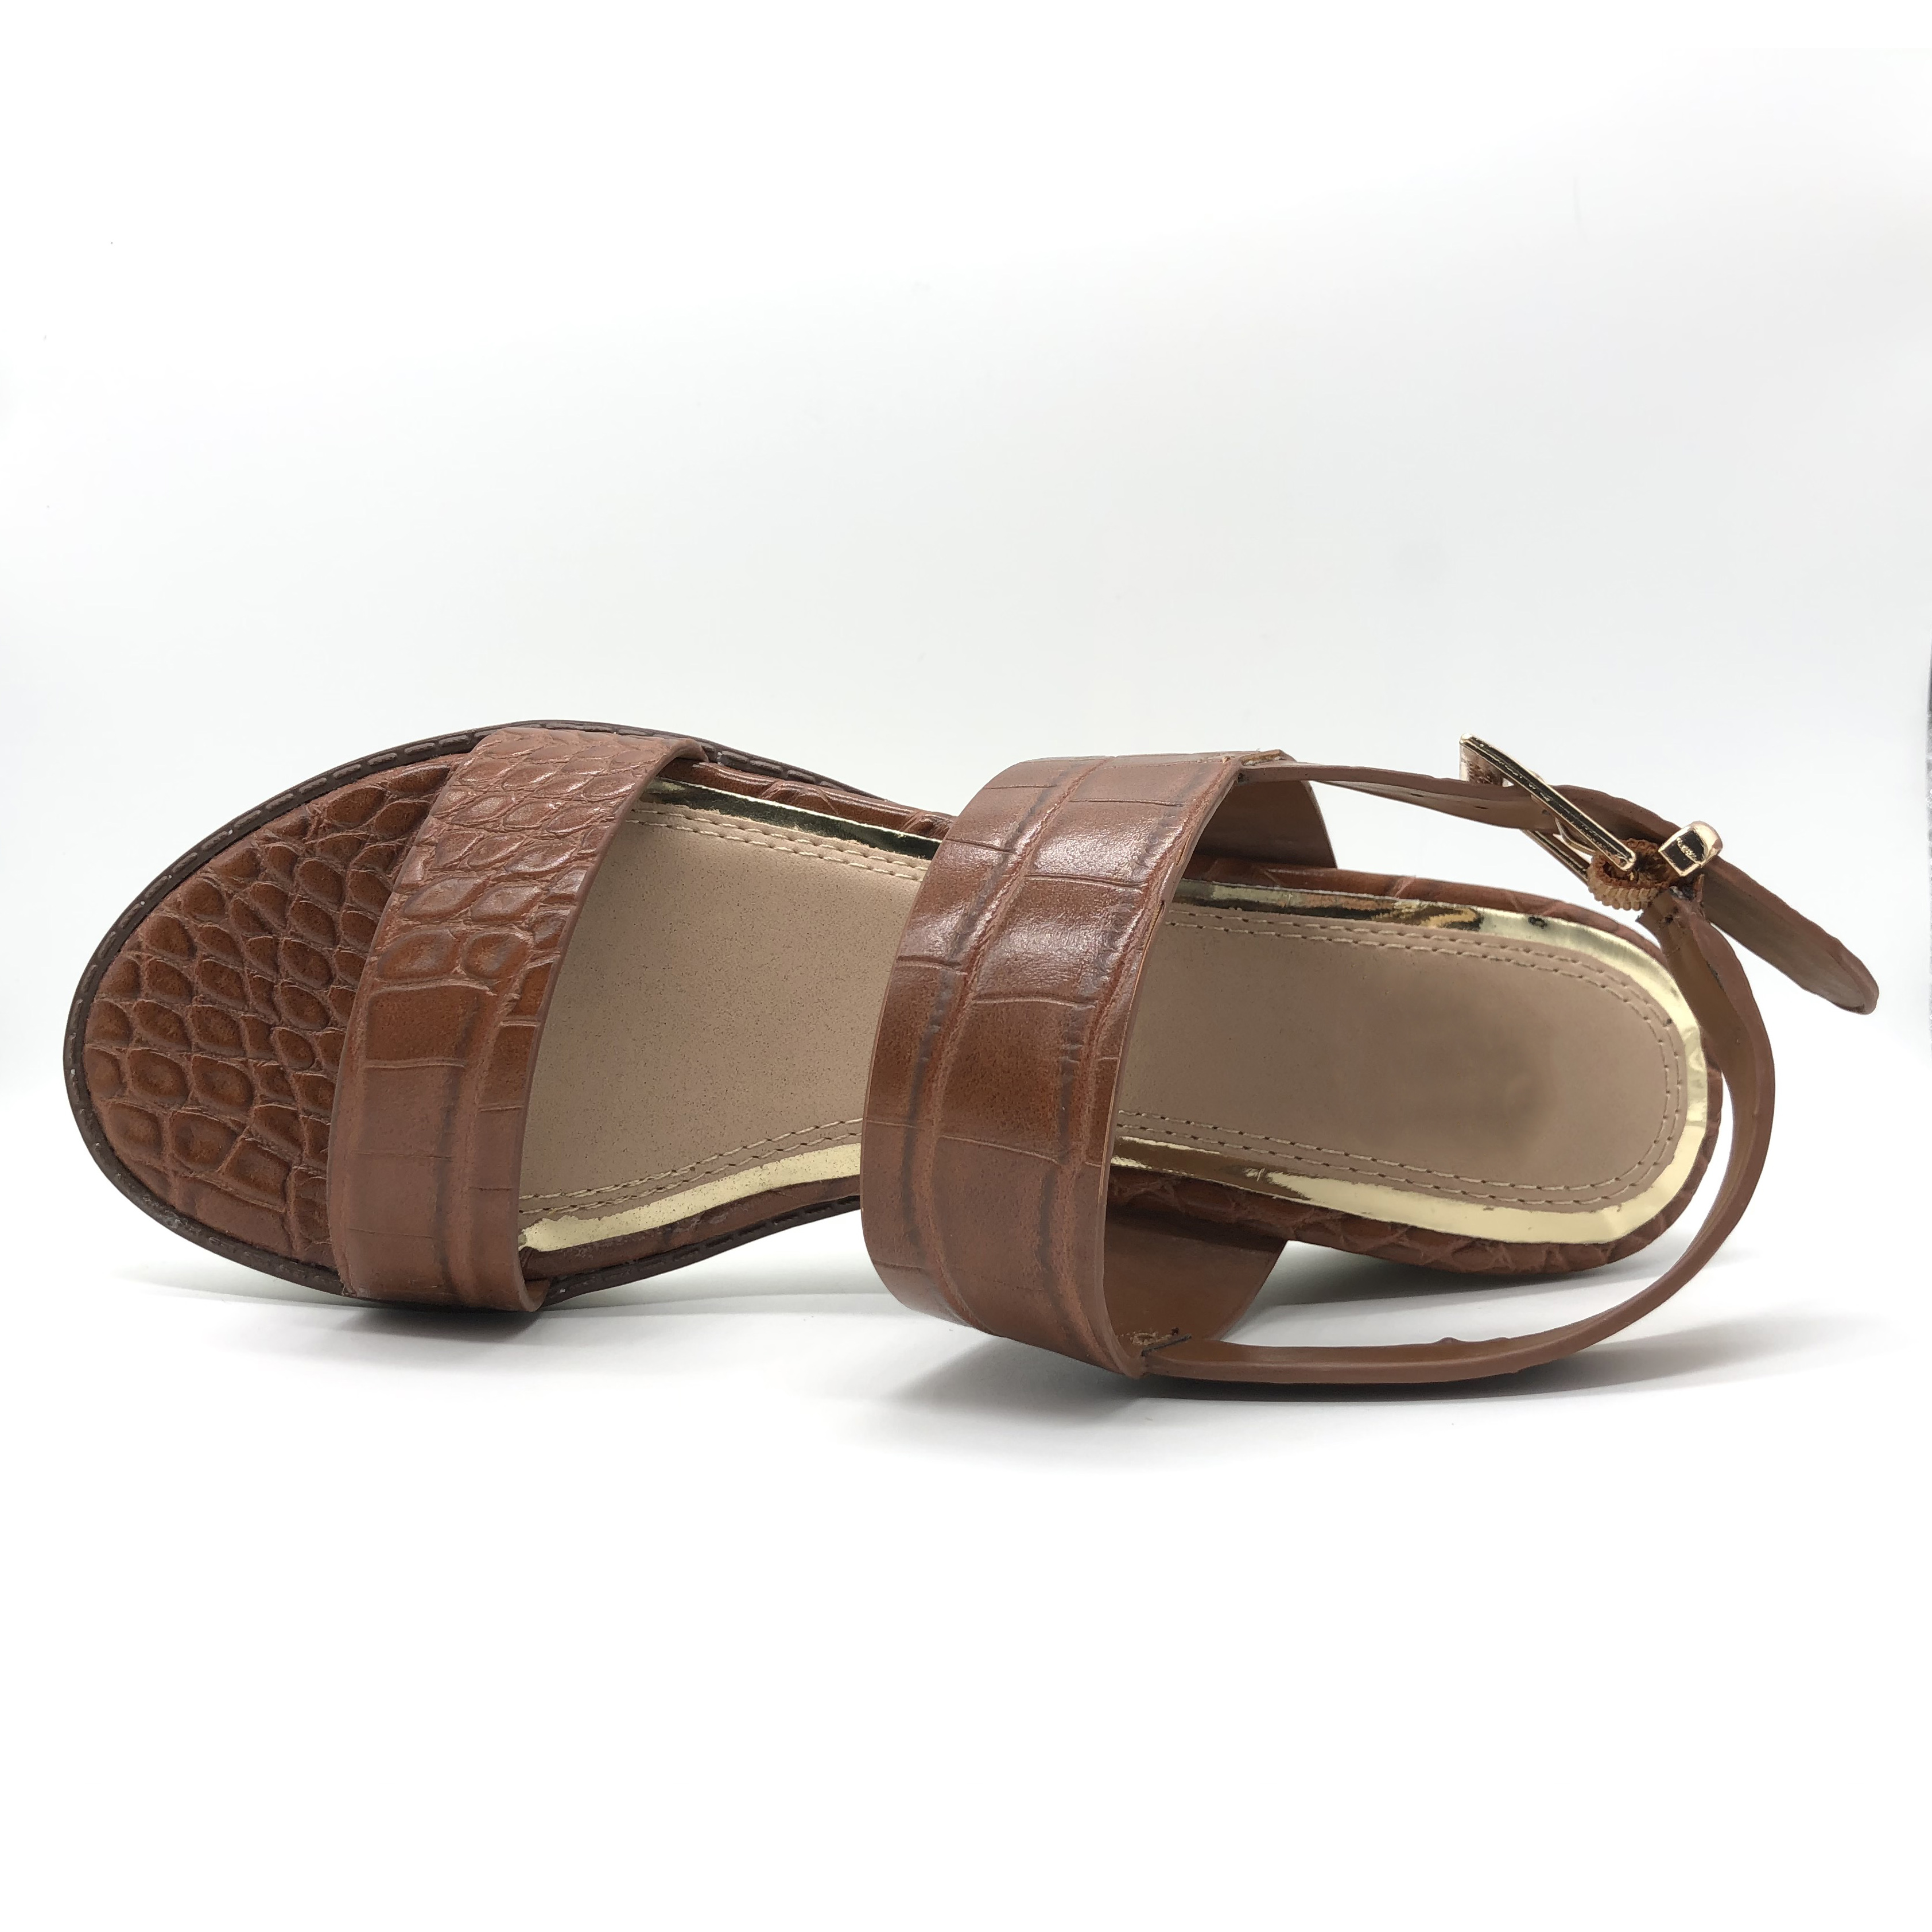 High quality Crocodile leather Middle East ladies sandals